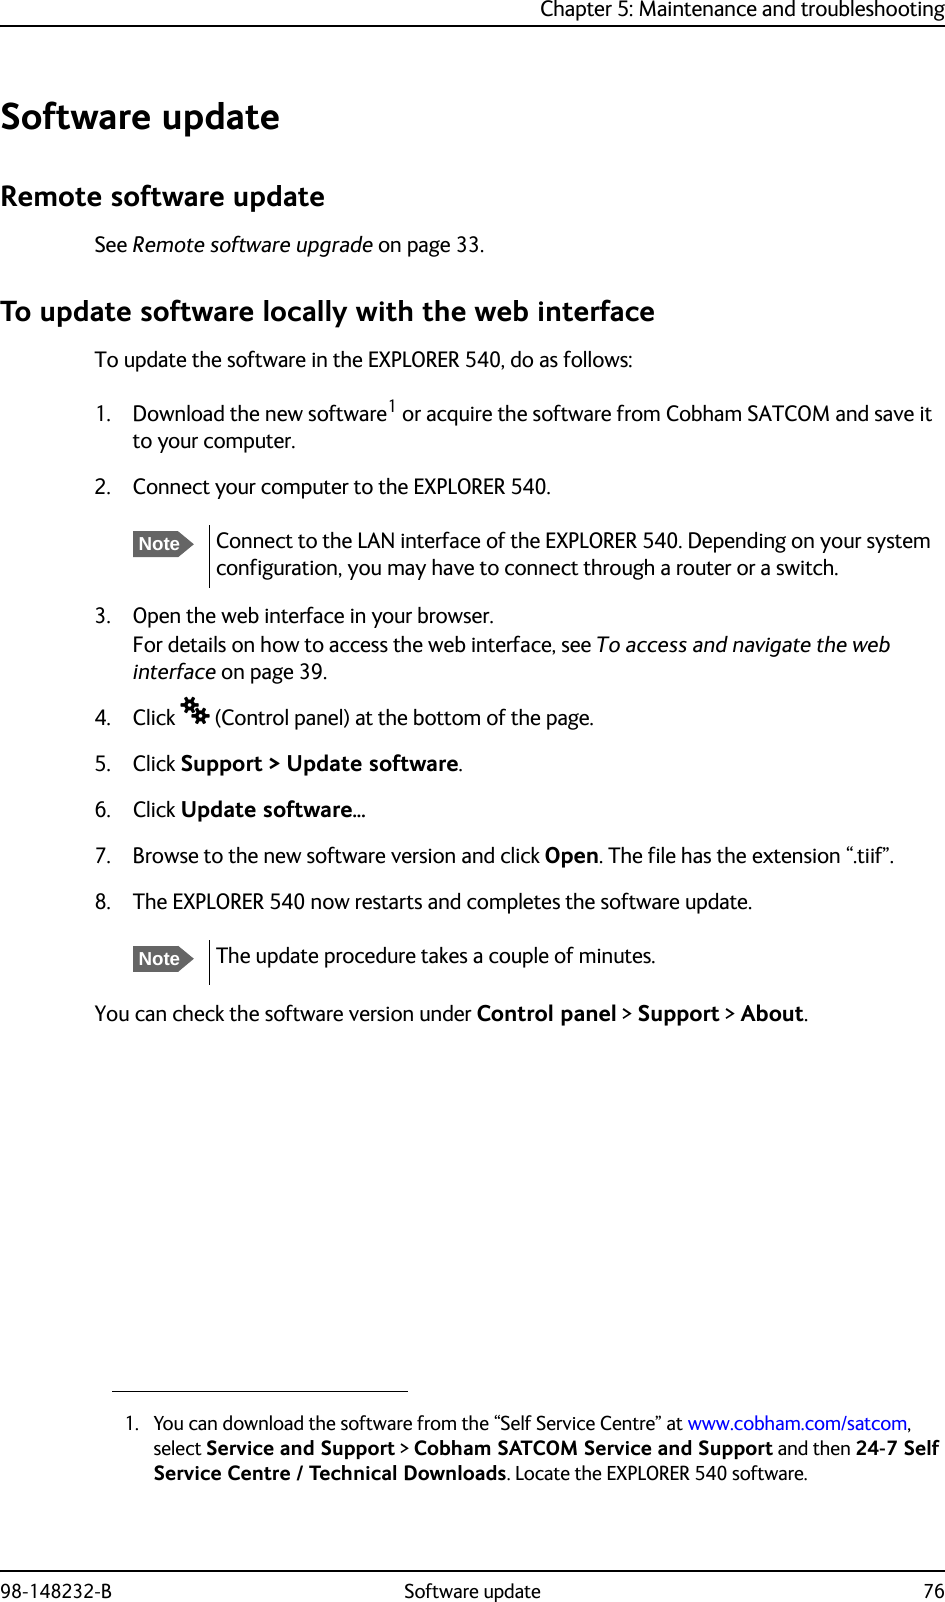 Chapter 5: Maintenance and troubleshooting98-148232-B Software update 76Software updateRemote software updateSee Remote software upgrade on page 33.To update software locally with the web interfaceTo update the software in the EXPLORER 540, do as follows:1. Download the new software1 or acquire the software from Cobham SATCOM and save it to your computer.2. Connect your computer to the EXPLORER 540.3. Open the web interface in your browser.For details on how to access the web interface, see To access and navigate the web interface on page 39.4. Click  (Control panel) at the bottom of the page.5. Click Support &gt; Update software.6. Click Update software... 7. Browse to the new software version and click Open. The file has the extension “.tiif”.8. The EXPLORER 540 now restarts and completes the software update. You can check the software version under Control panel &gt; Support &gt; About.1. You can download the software from the “Self Service Centre” at www.cobham.com/satcom, select Service and Support &gt; Cobham SATCOM Service and Support and then 24-7 Self Service Centre / Technical Downloads. Locate the EXPLORER 540 software.NoteConnect to the LAN interface of the EXPLORER 540. Depending on your system configuration, you may have to connect through a router or a switch.NoteThe update procedure takes a couple of minutes.